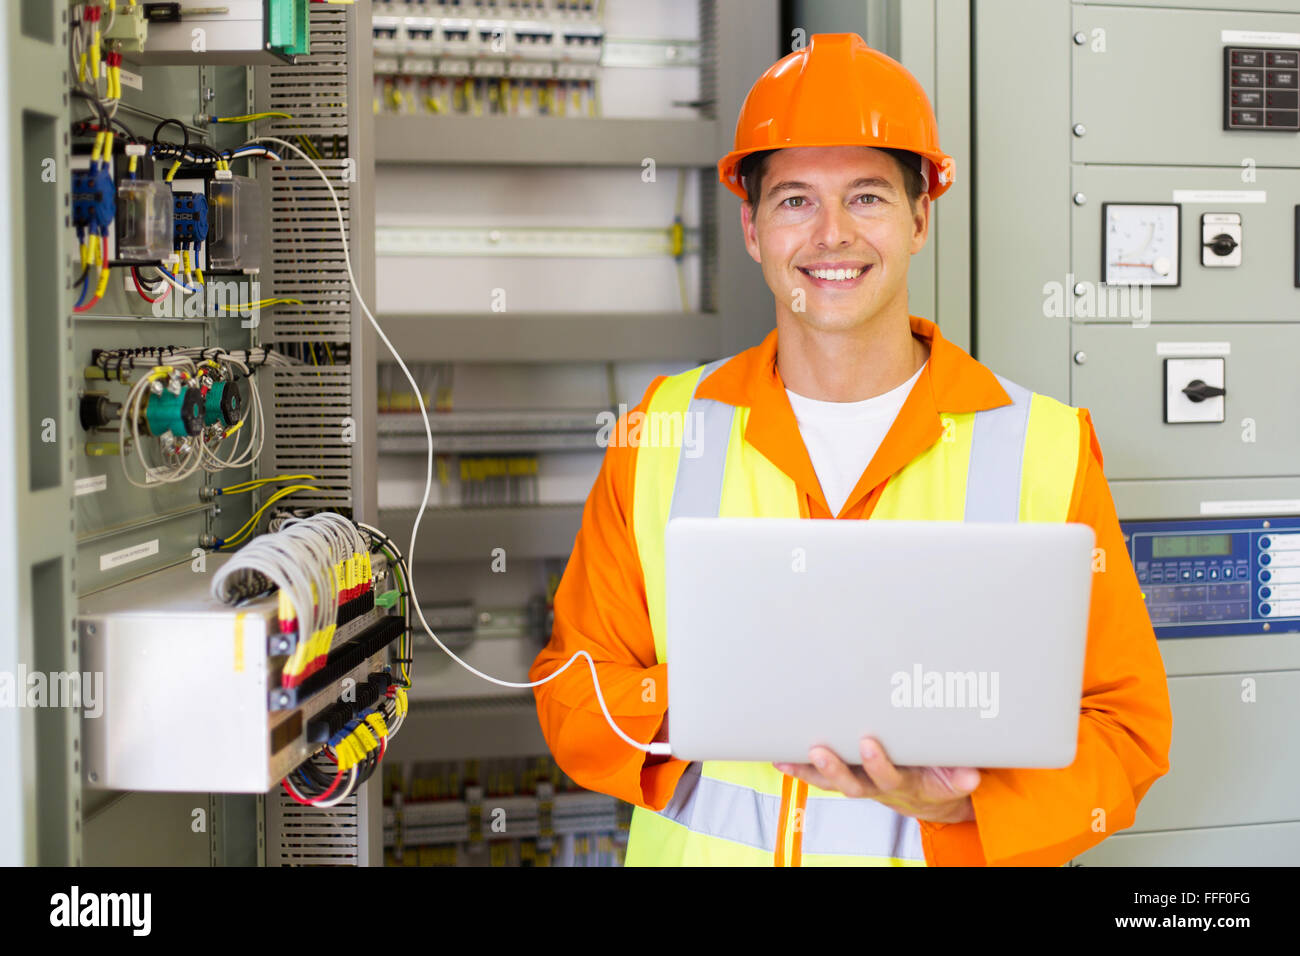 portrait of professional industrial technician in front of machinery control panel Stock Photo